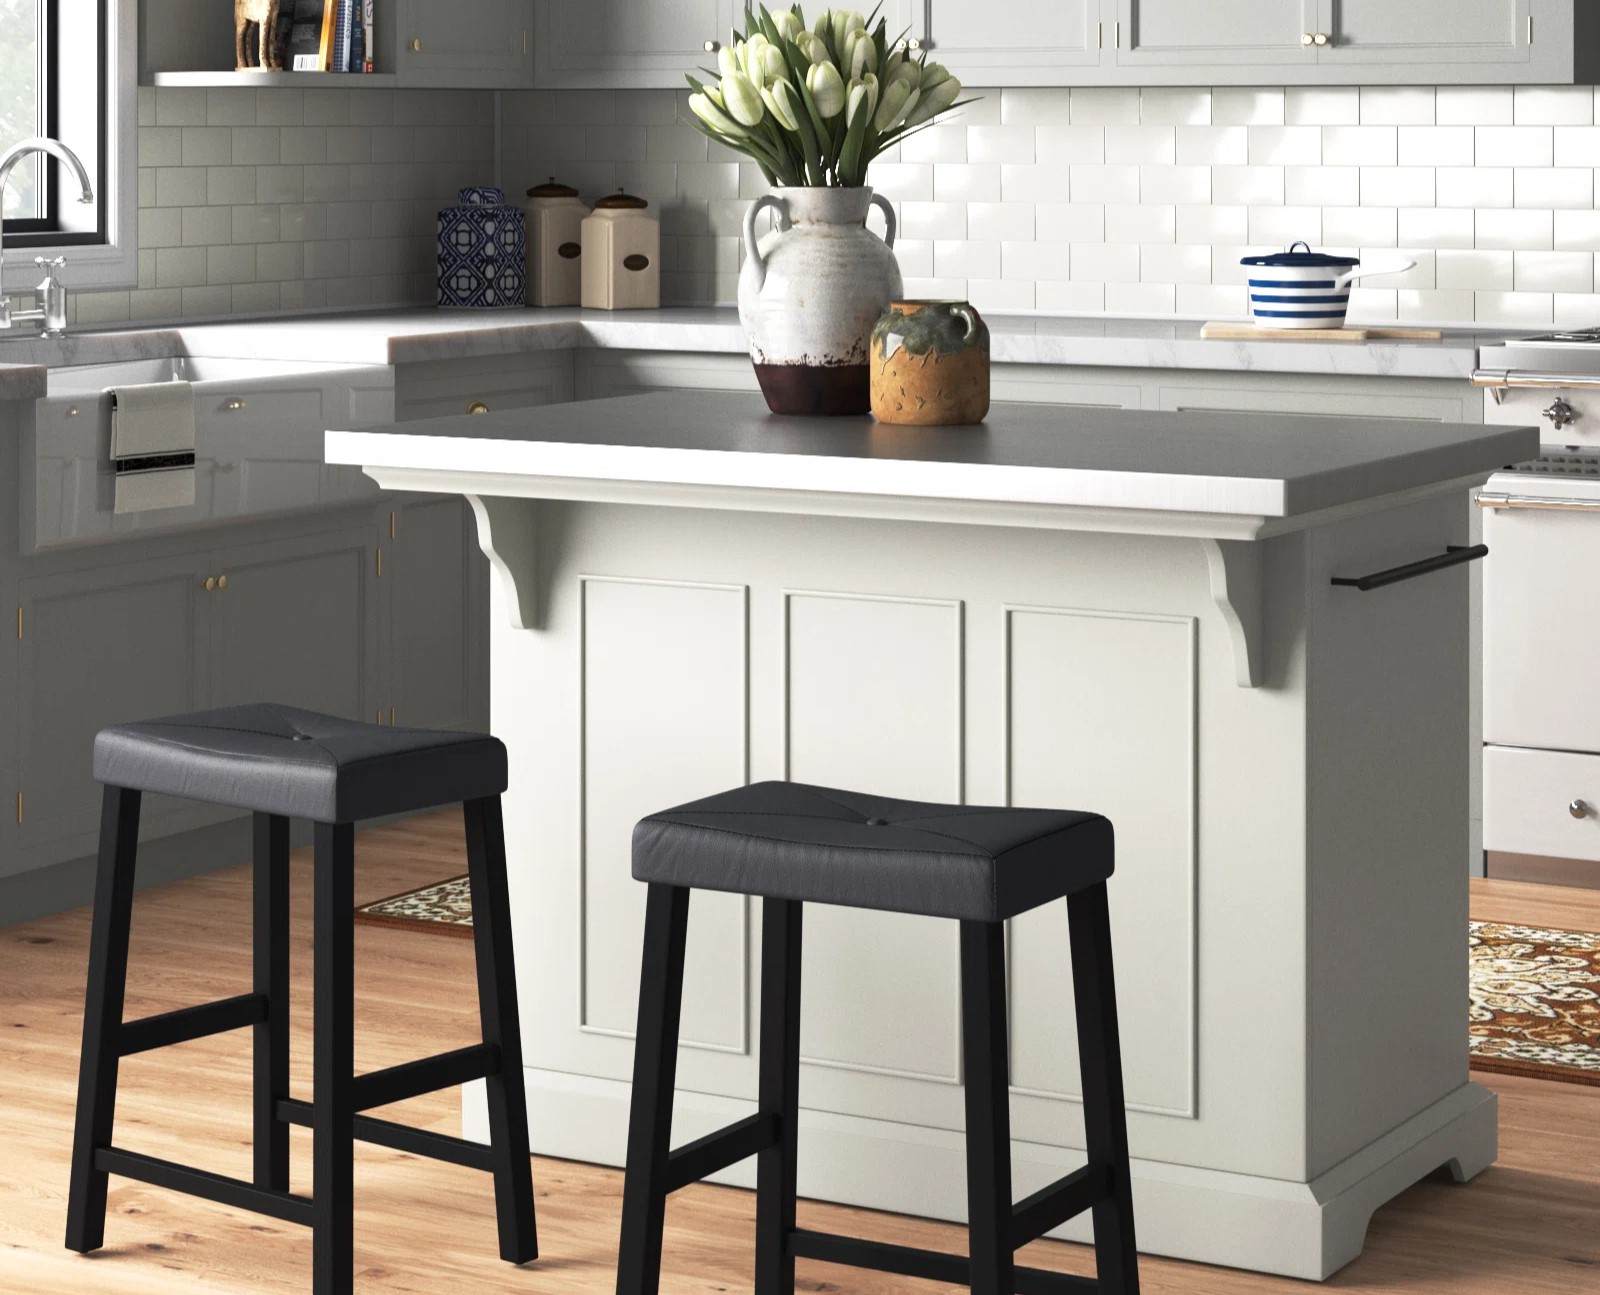 How To Install The Table-Style Apron For The Kitchen Island